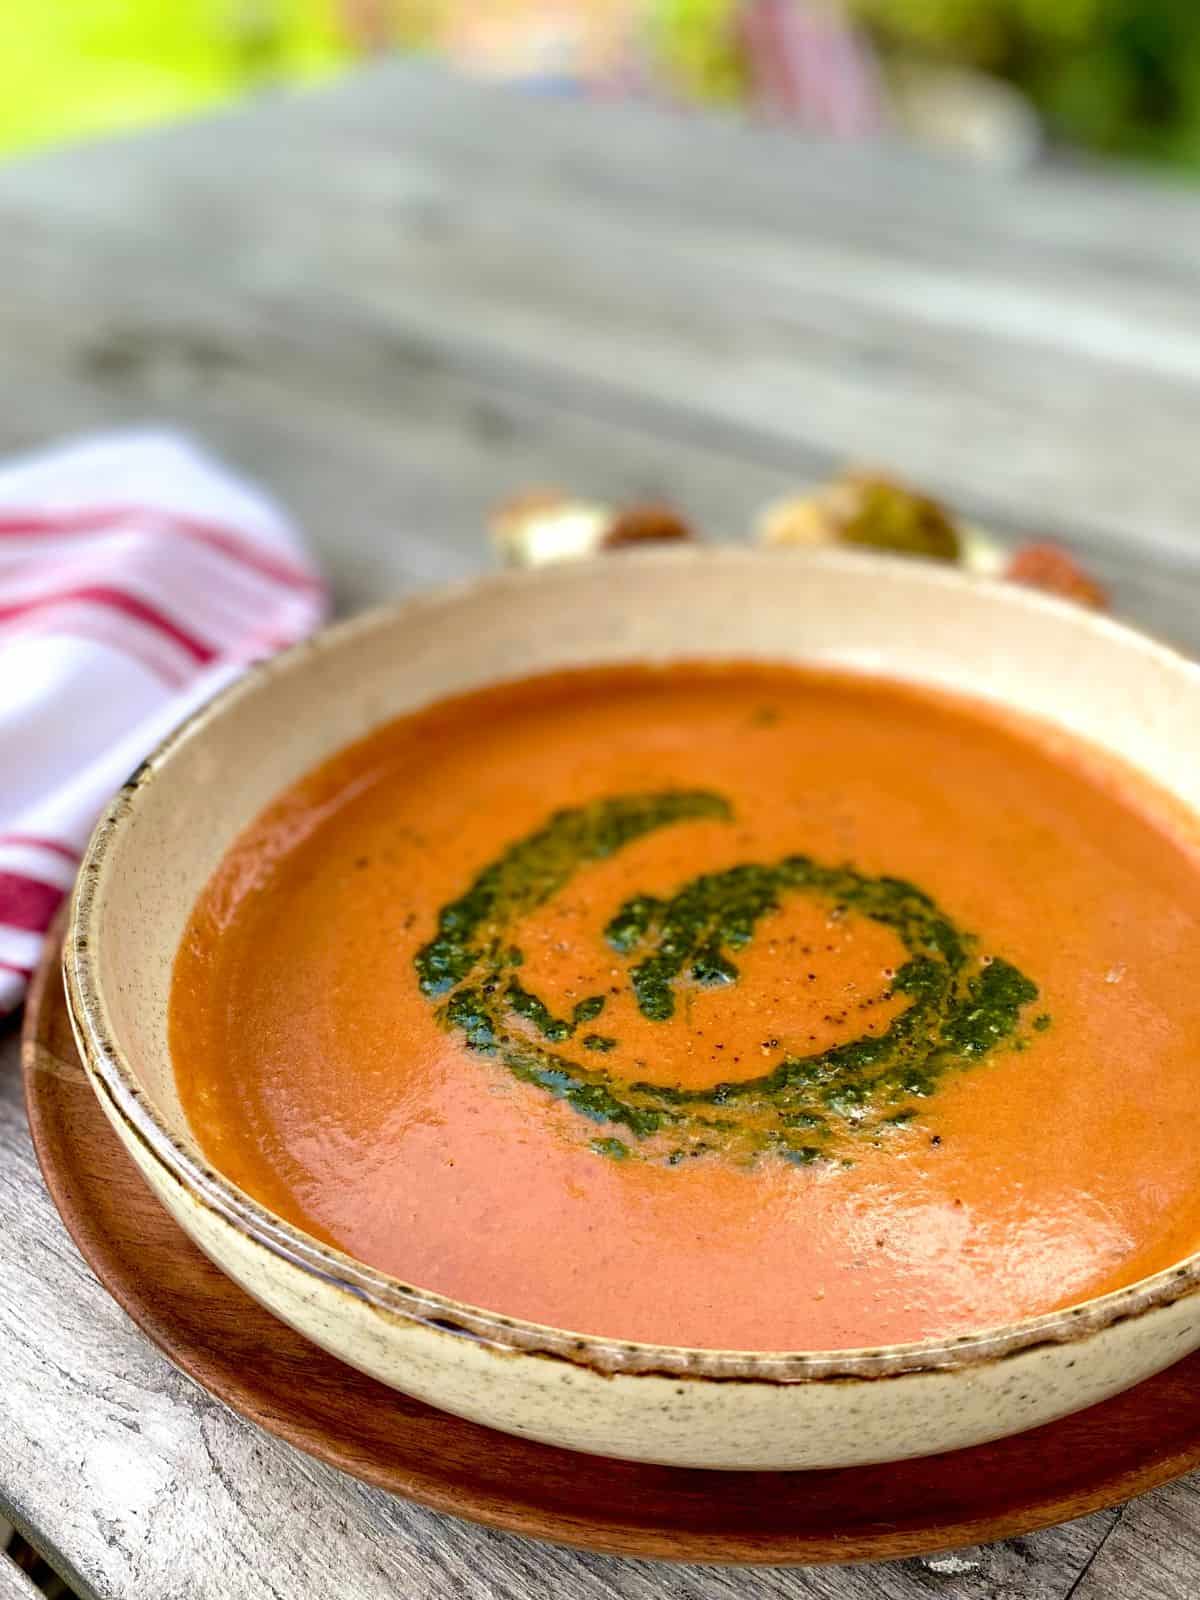 creamy tomato soup swirled with pesto in bowl with red and white napkin